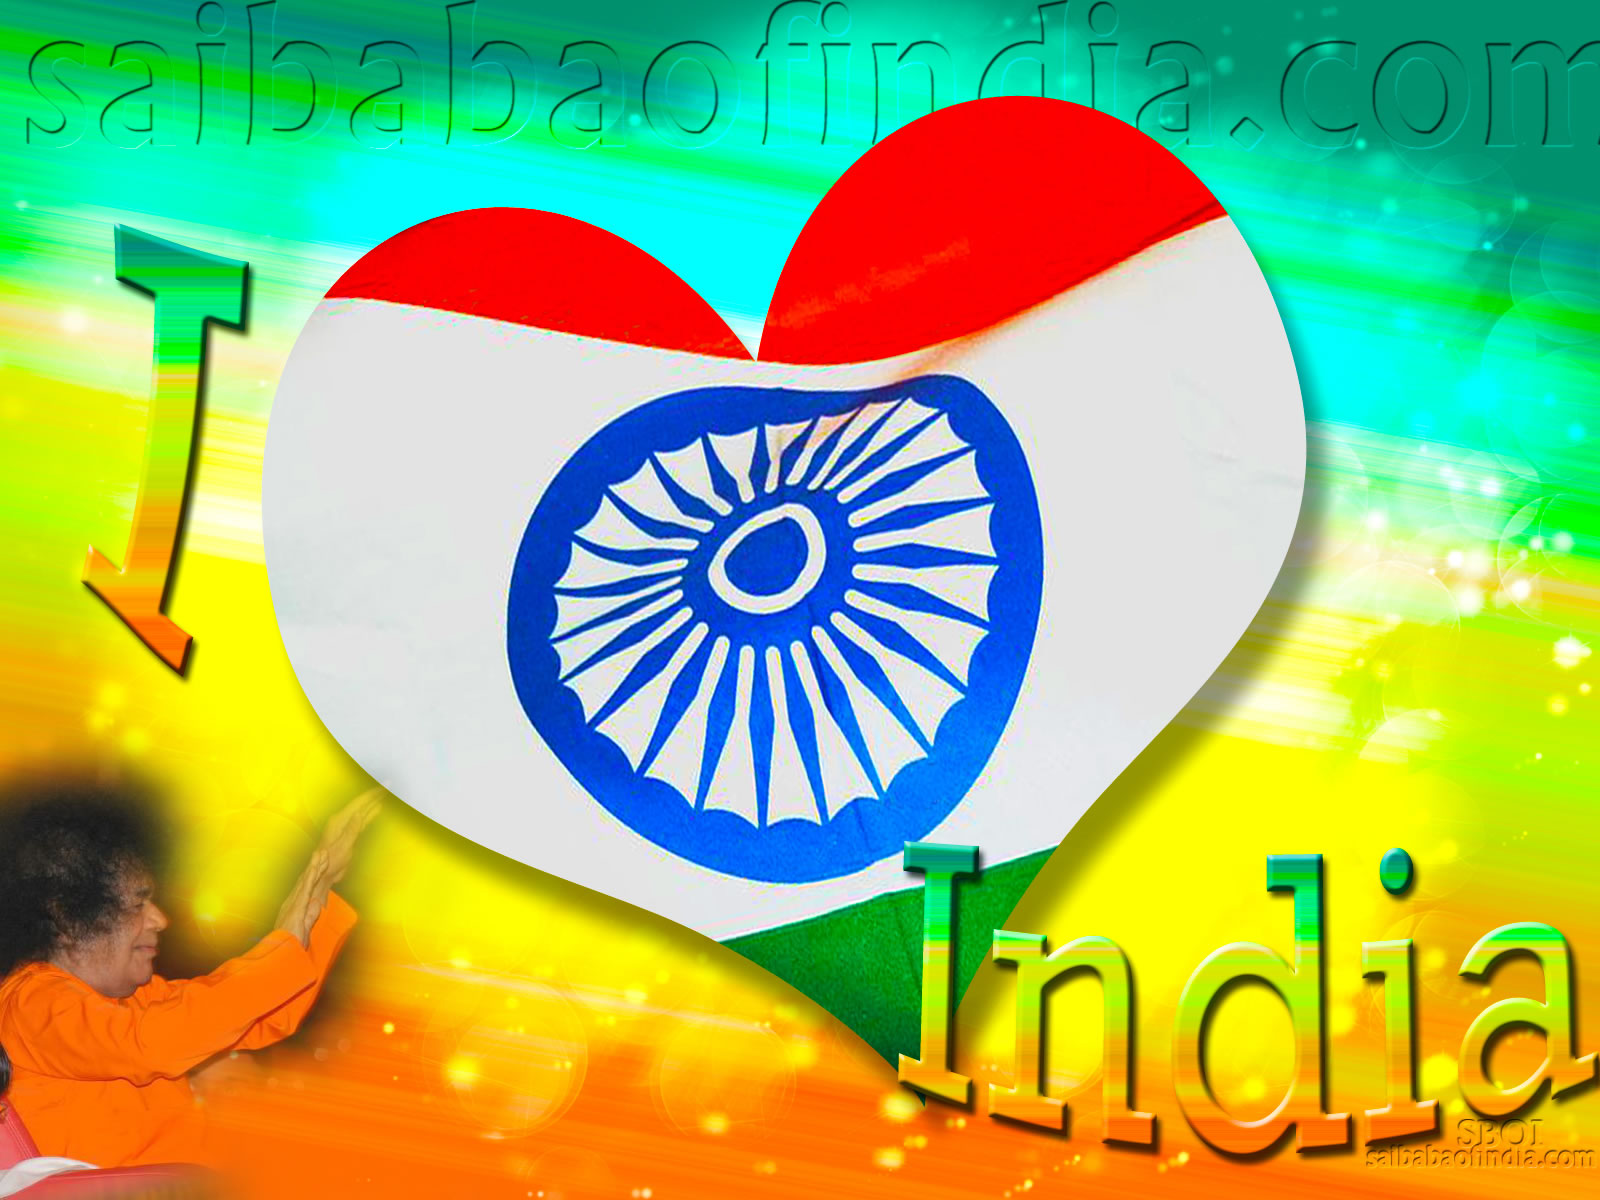 Independence day wallpaper & greeting cards 15th August- Sai Baba Of India August Wallpaper